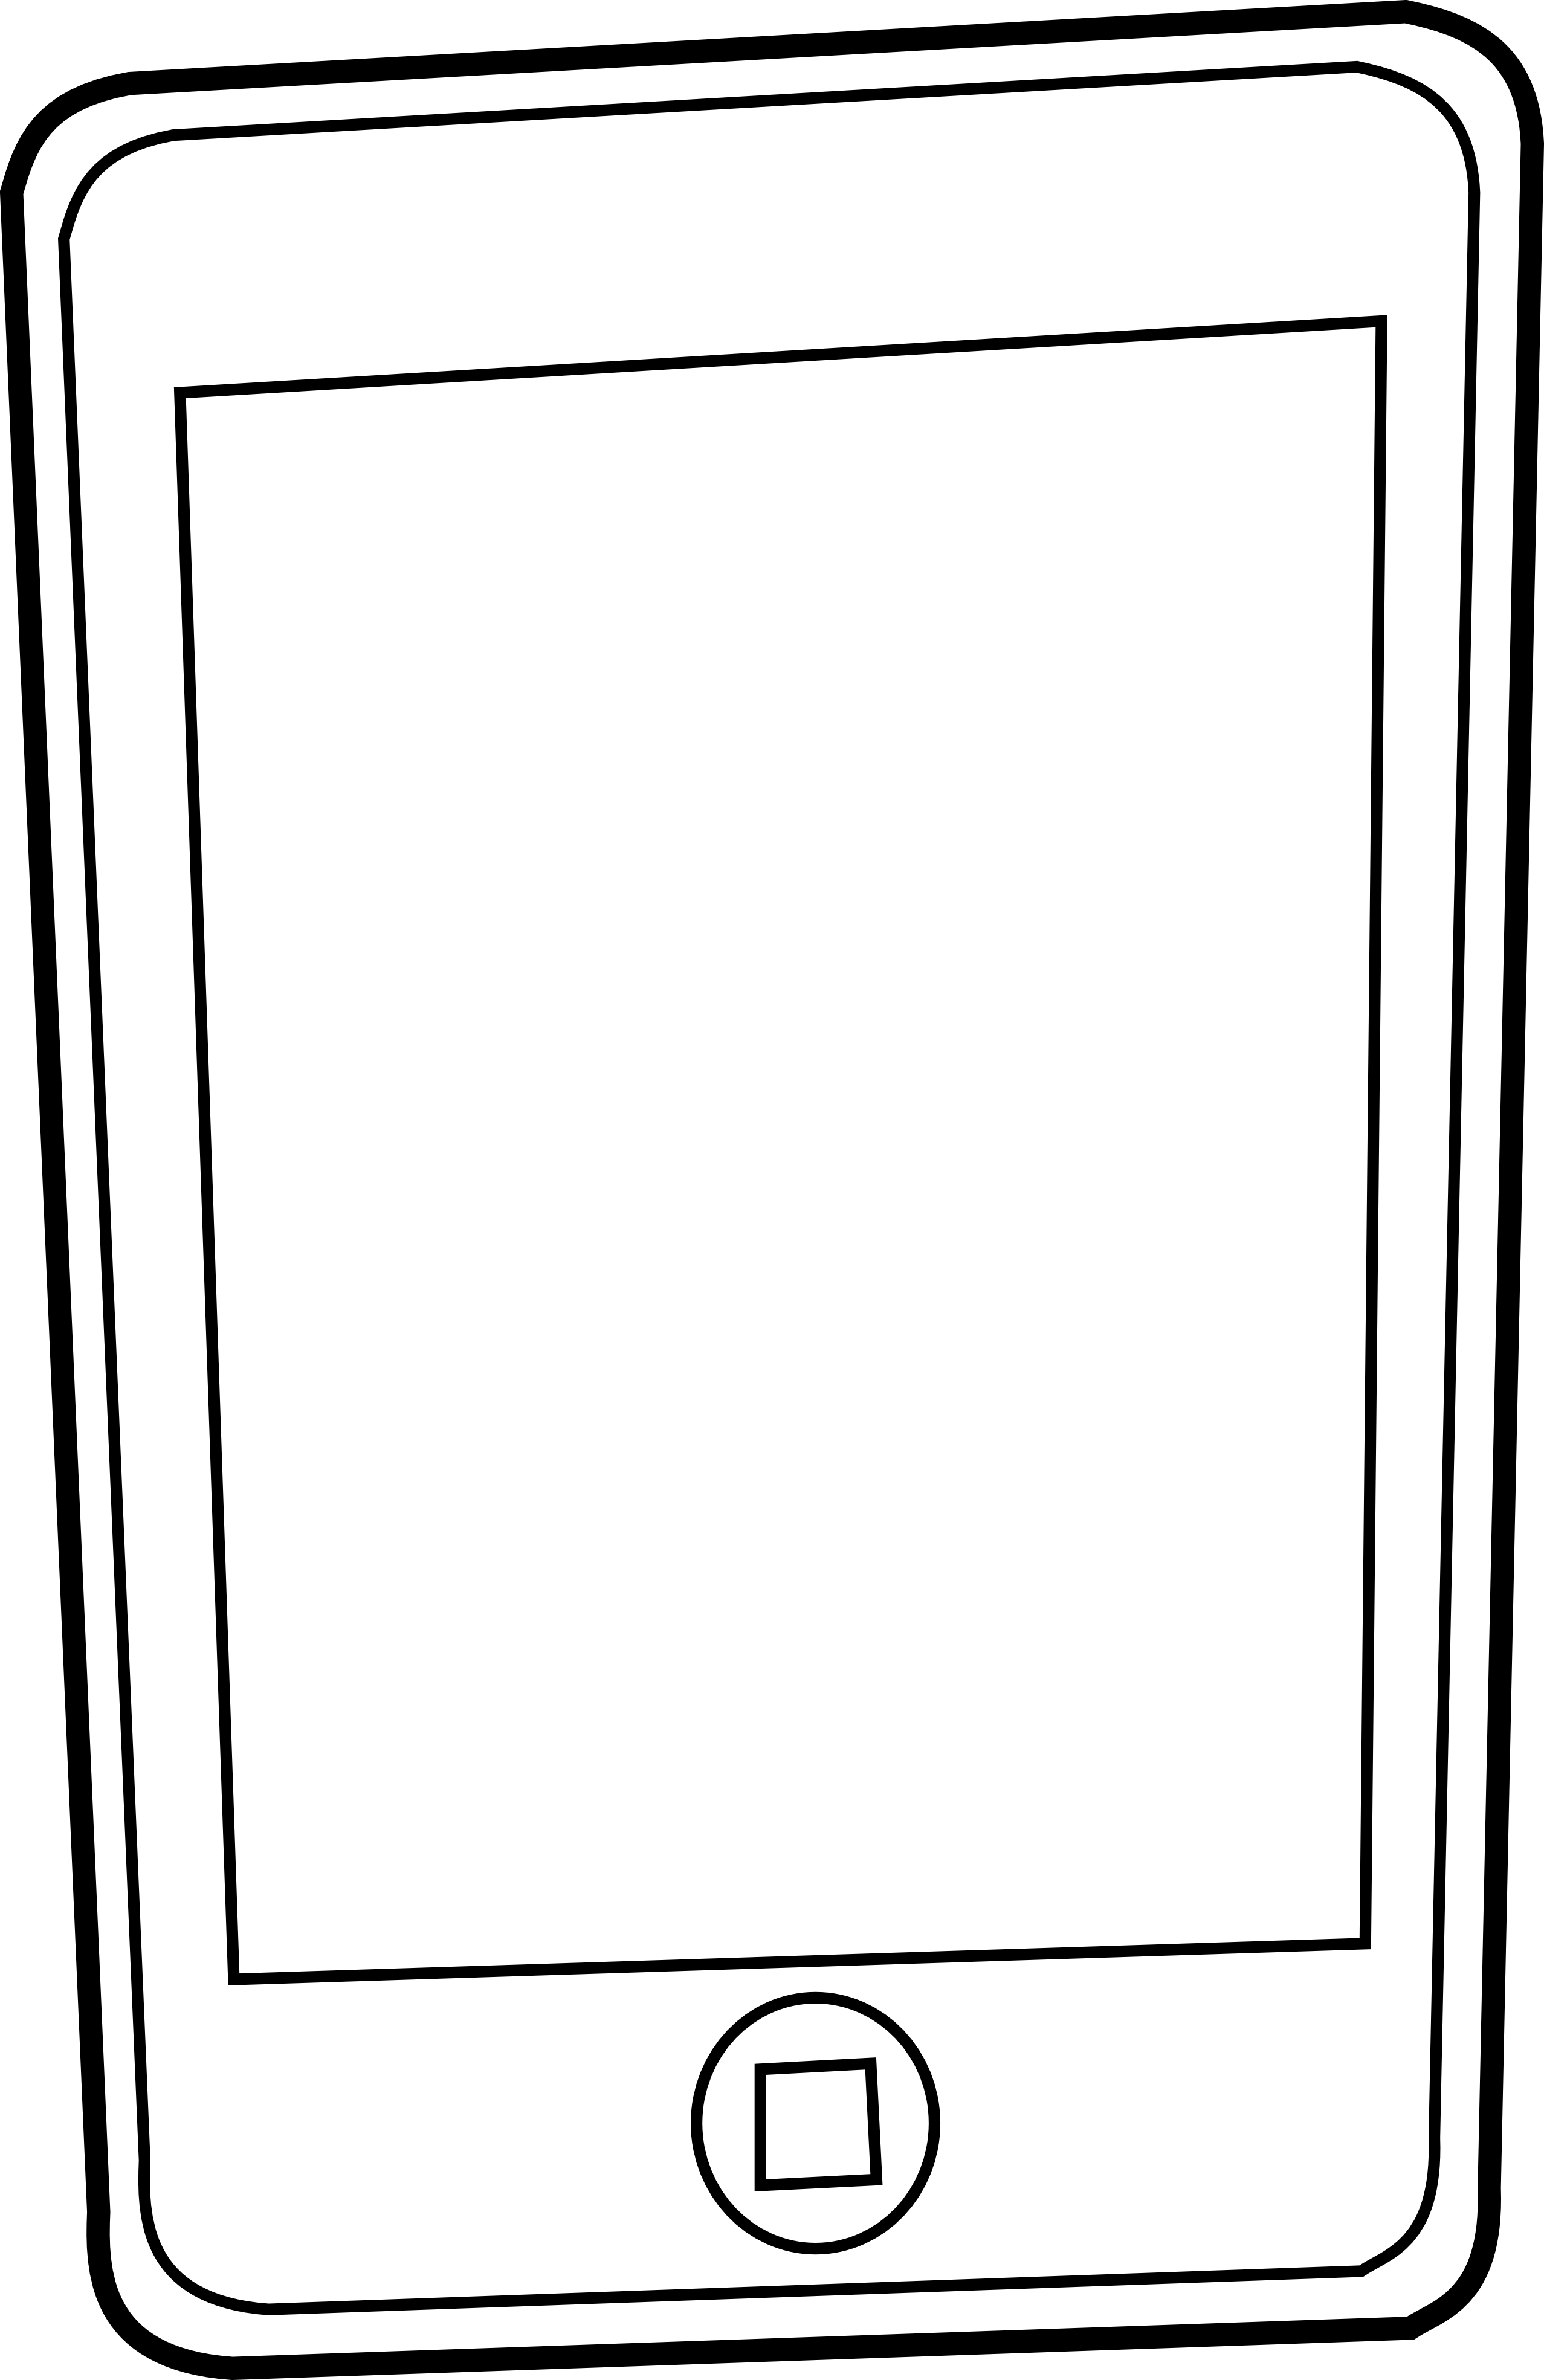 Cell Phone Clipart Black And White - Free Clipart ...